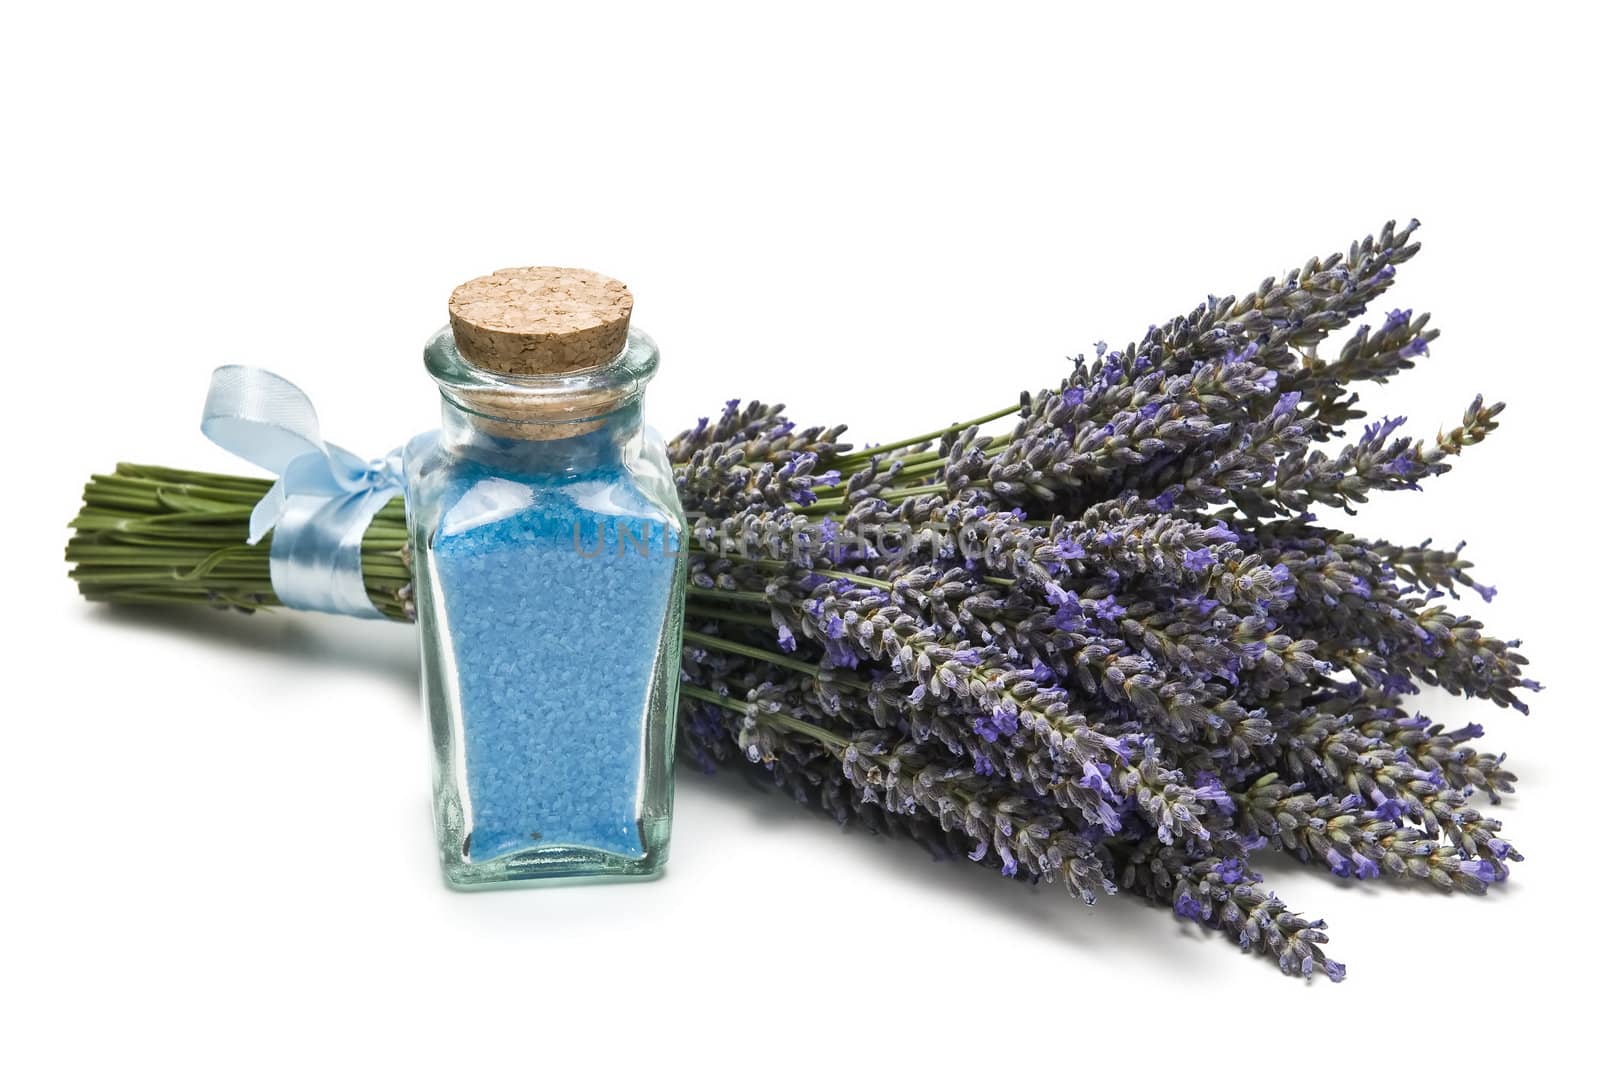 Lavender and hygiene items made of lavender isolated on a white background.